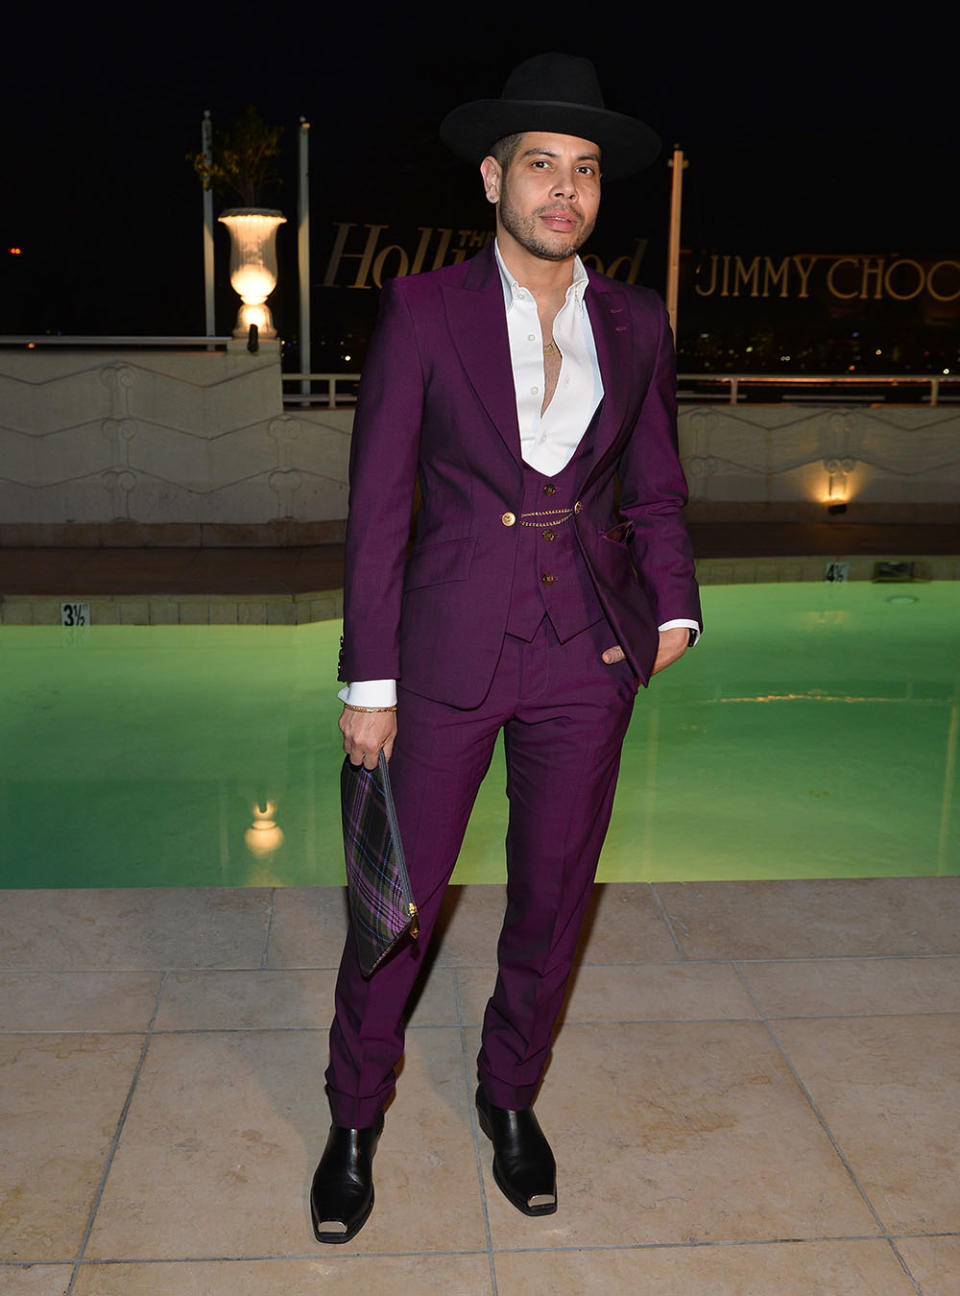 Enrique Melendez attends The Hollywood Reporter And Jimmy Choo Power Stylists Dinner at The Terrace at Sunset Tower on March 28, 2023 in West Hollywood, California.